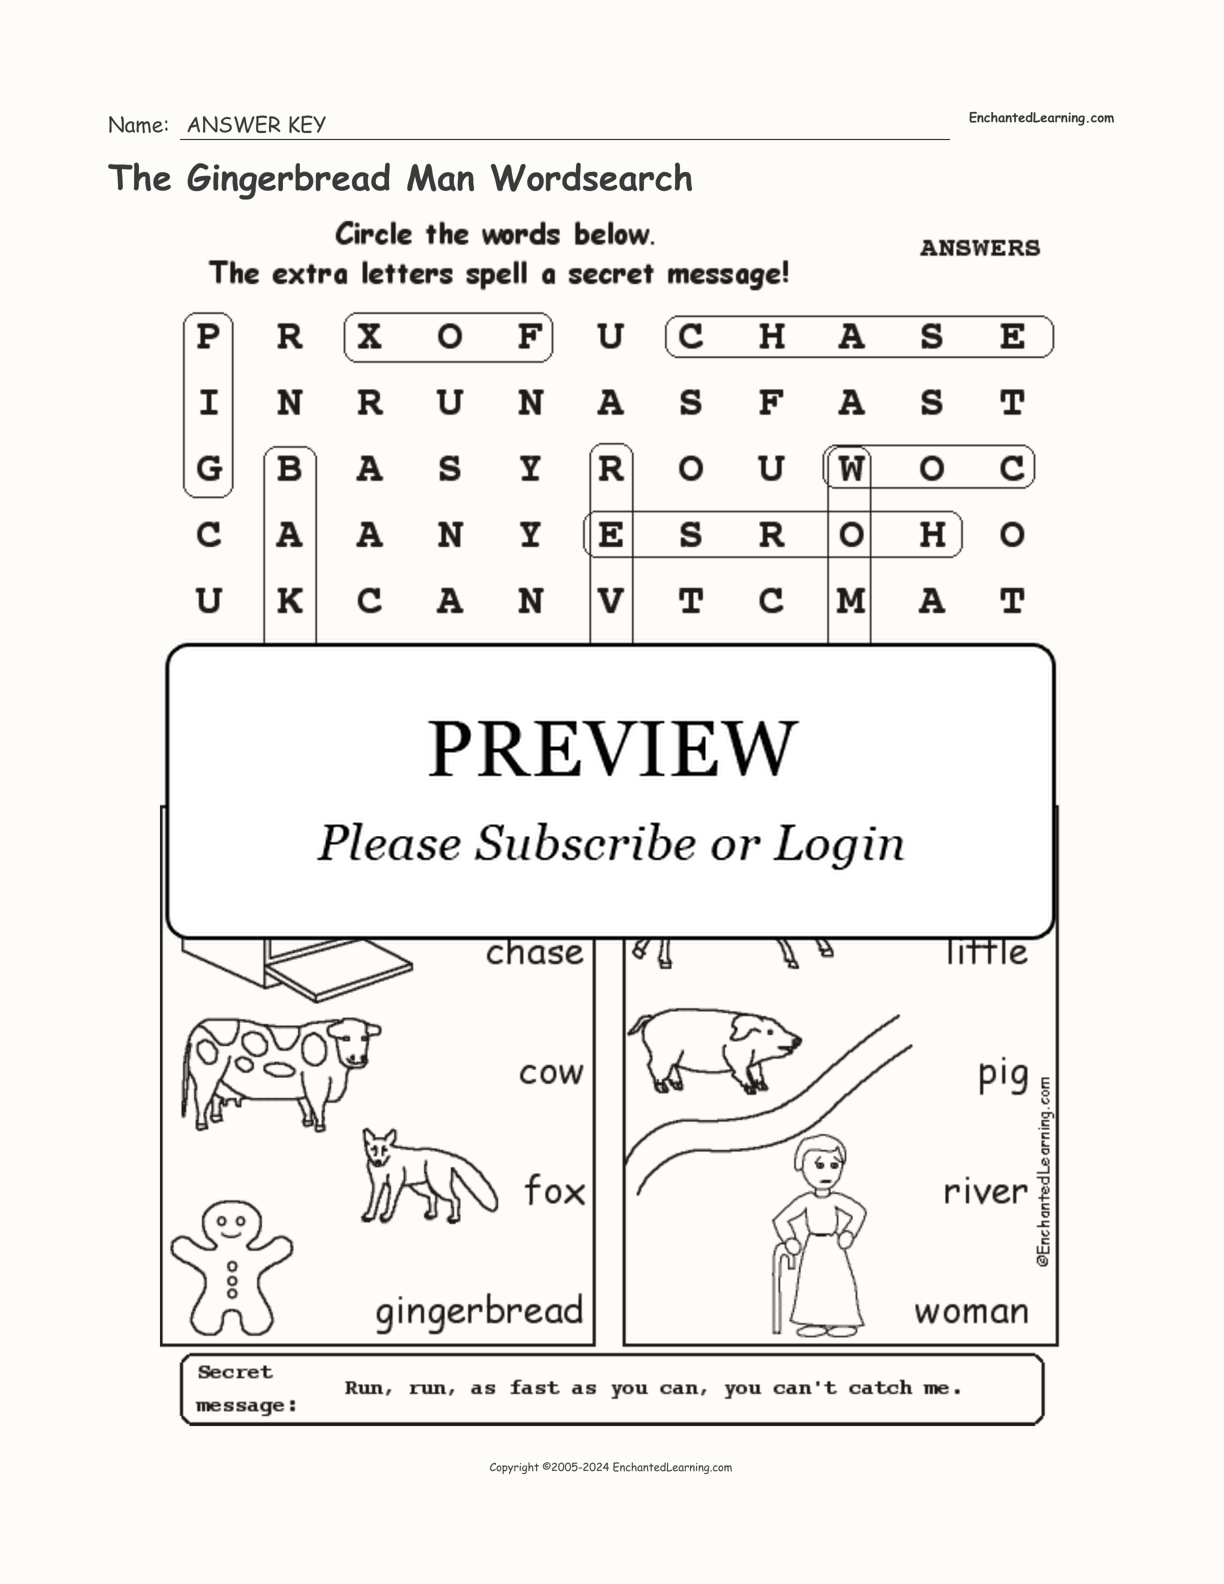 The Gingerbread Man Wordsearch interactive worksheet page 2